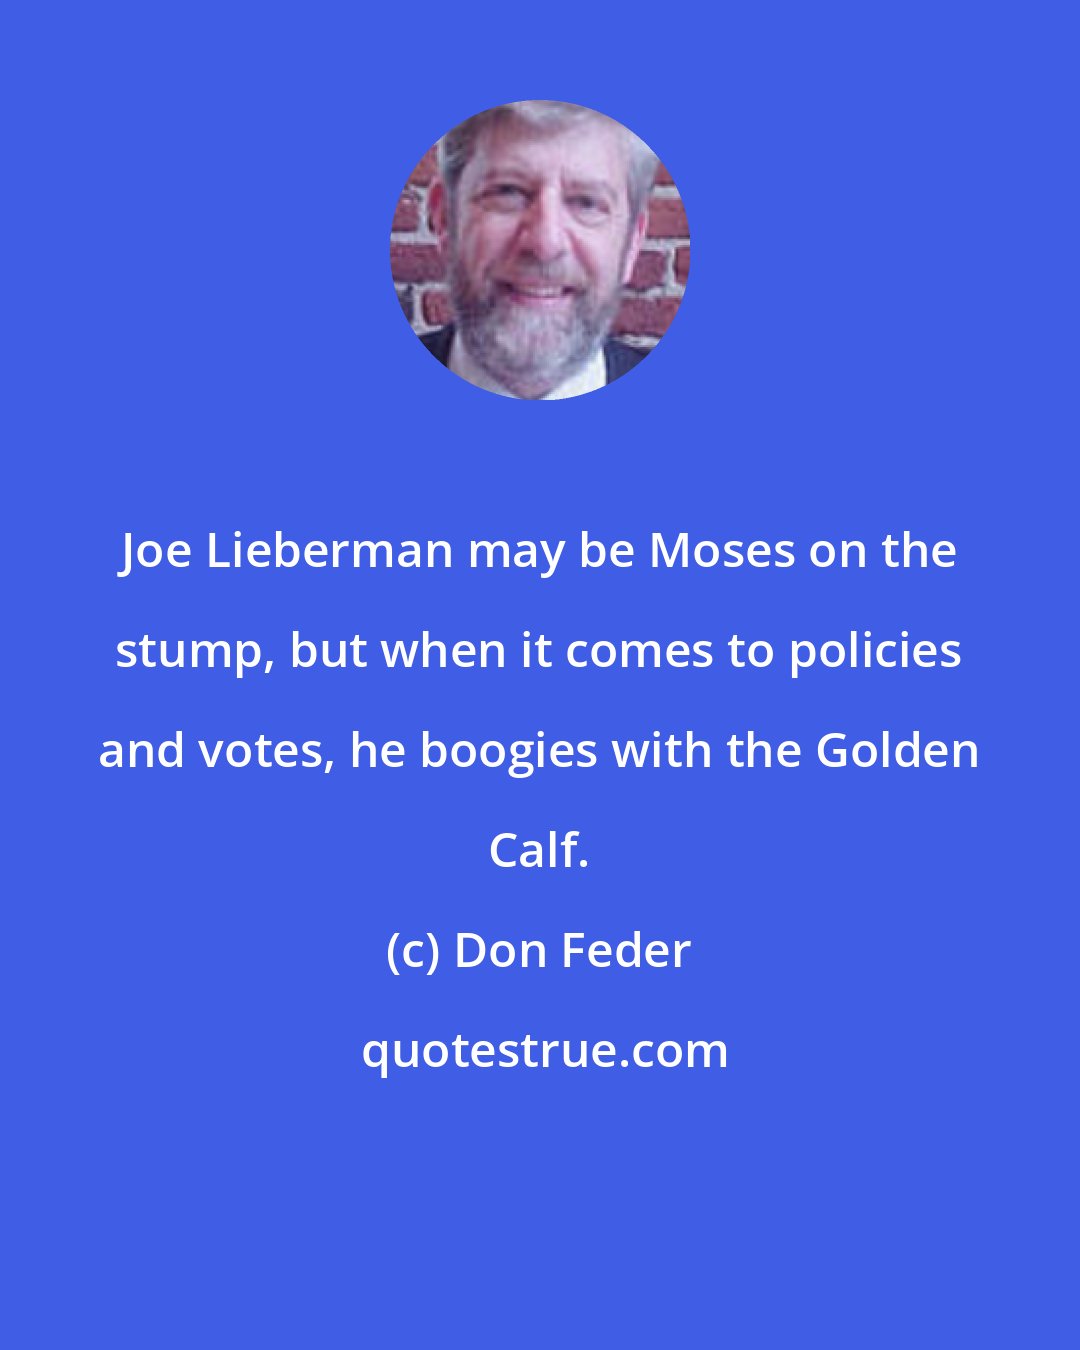 Don Feder: Joe Lieberman may be Moses on the stump, but when it comes to policies and votes, he boogies with the Golden Calf.